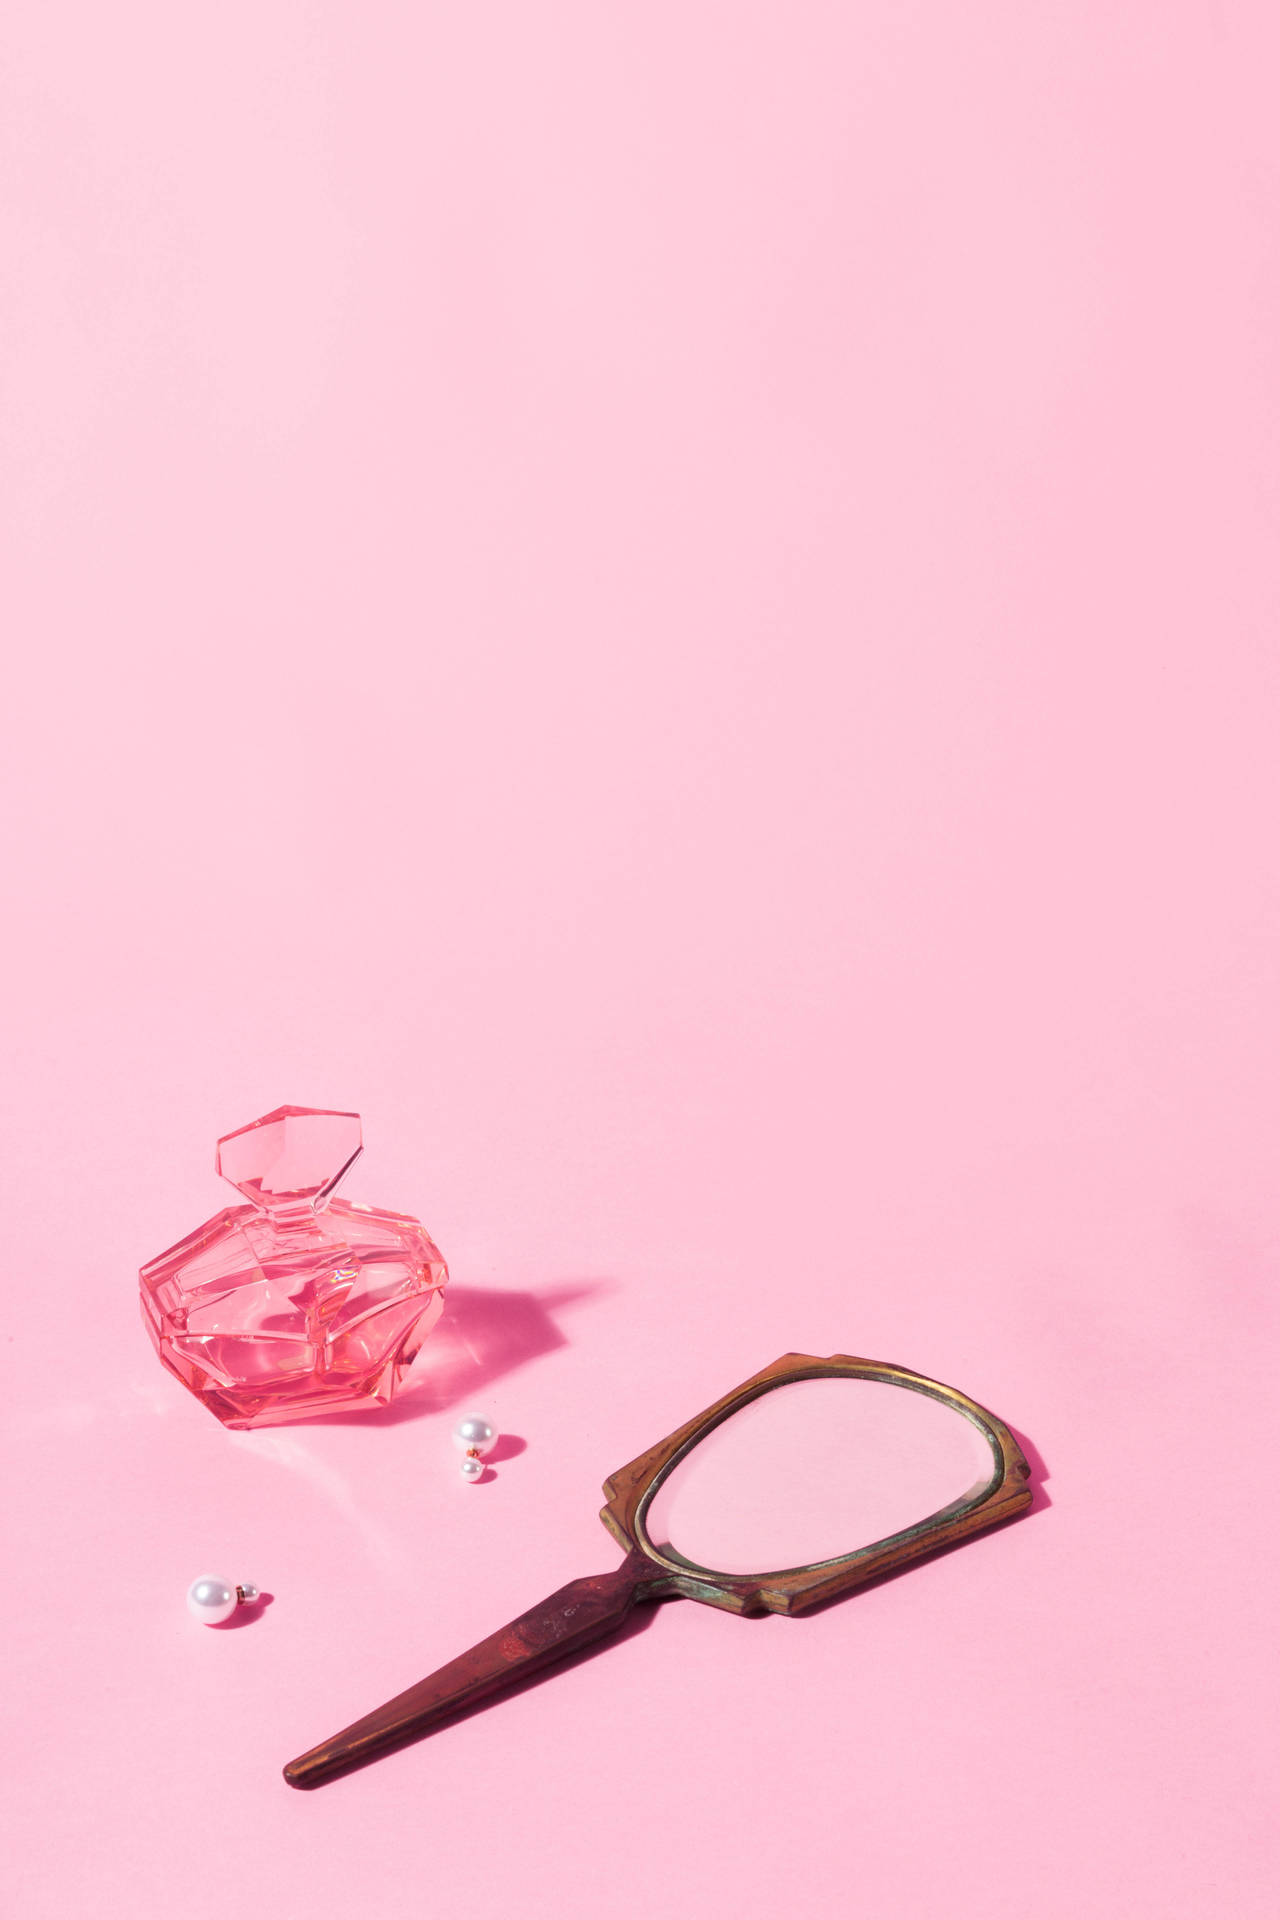 Trinkets On A Pink Color